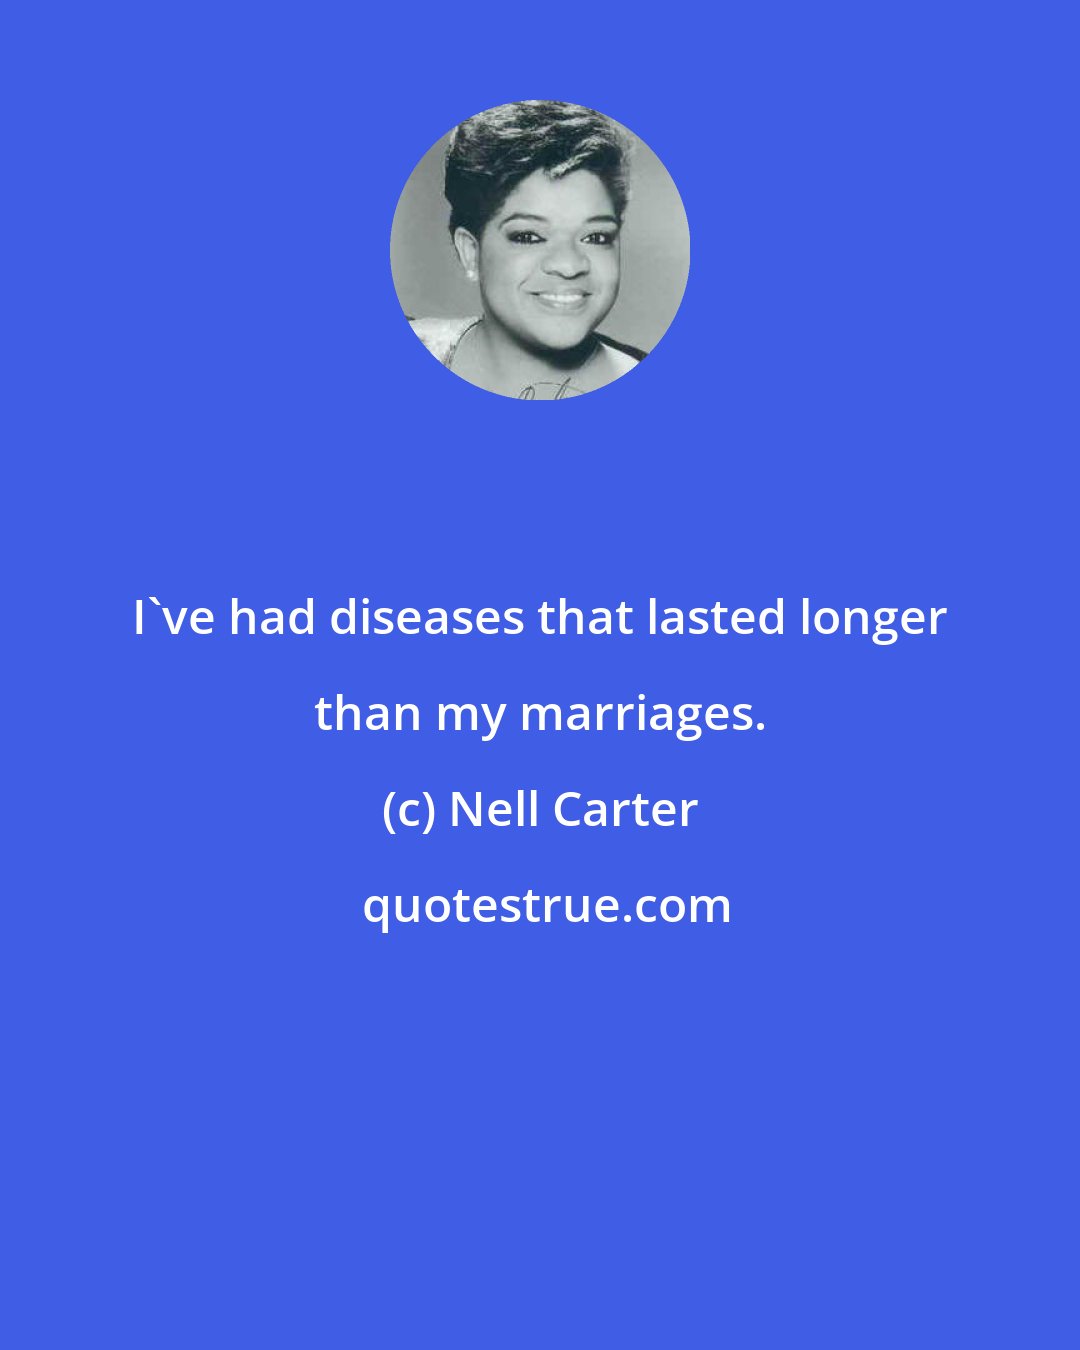 Nell Carter: I've had diseases that lasted longer than my marriages.